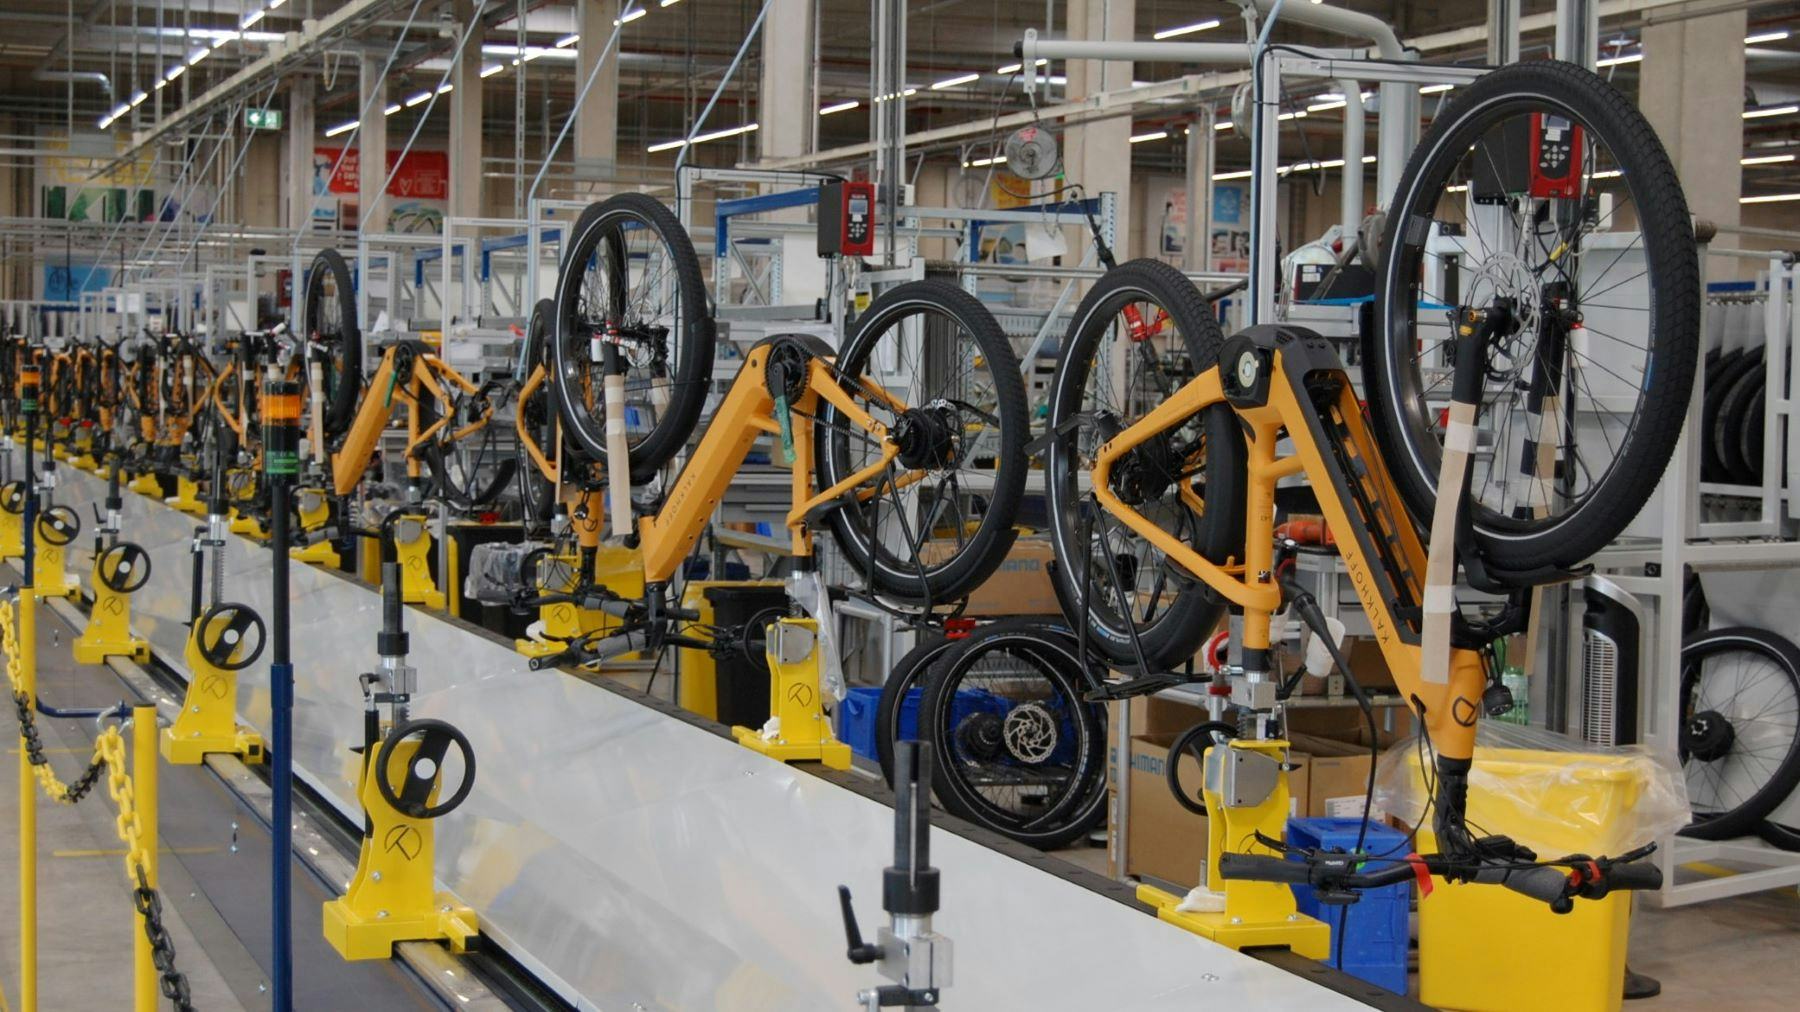 In 2022 Pon celebrated the opening of a new Kalkhoff factory in Germany. – Photo Bike Europe